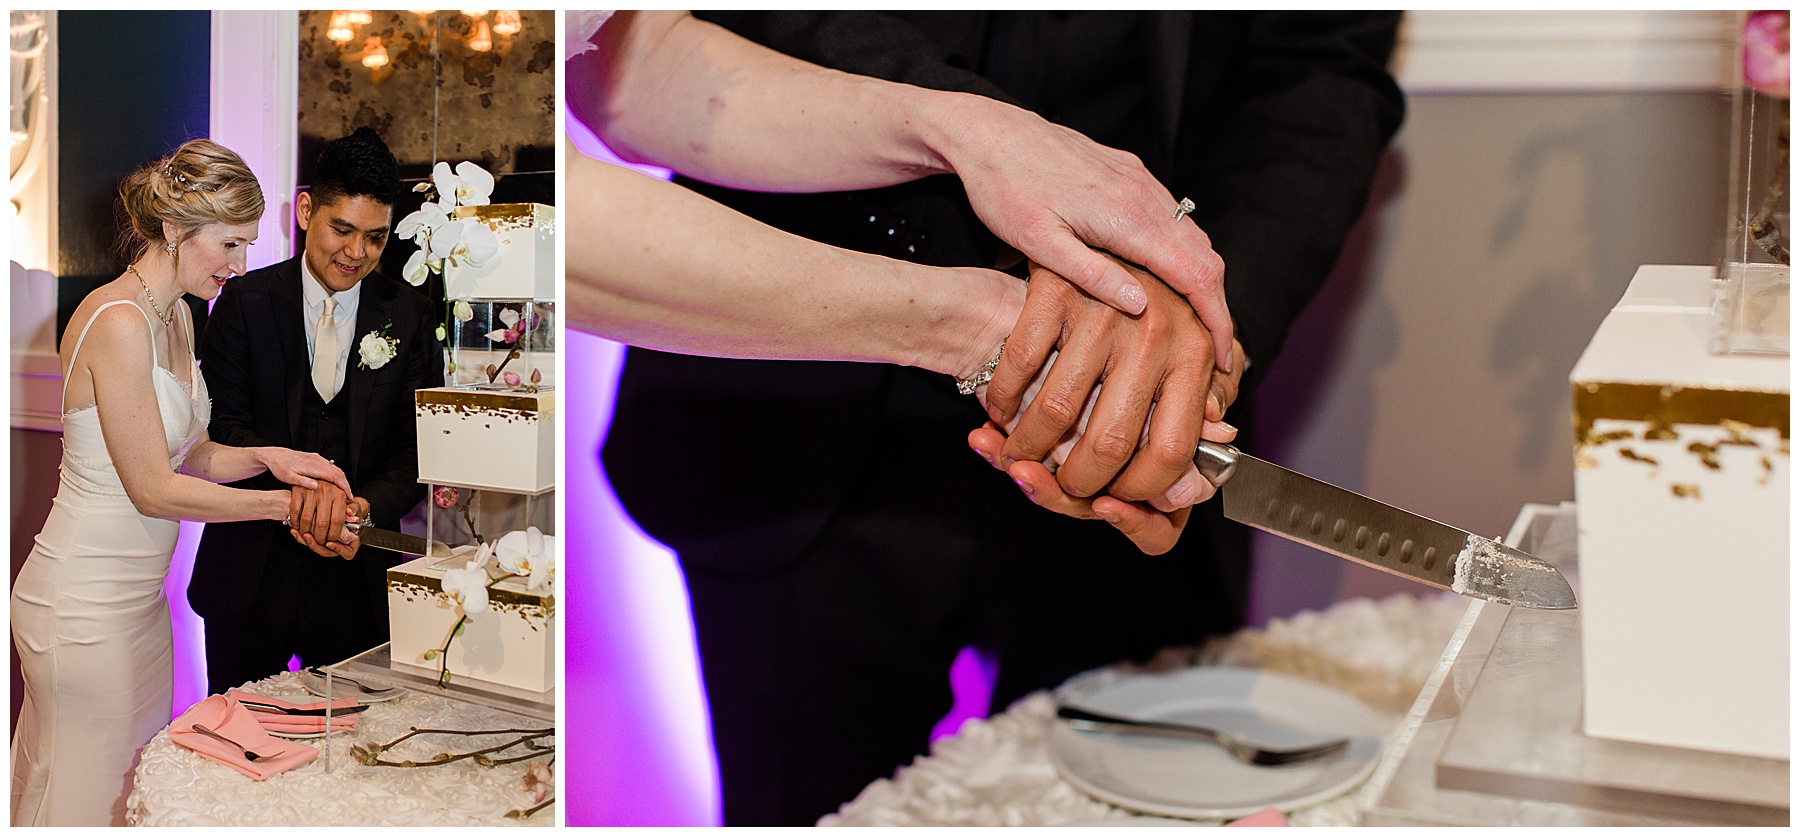 close up image of bride and groom cutting wedding cake